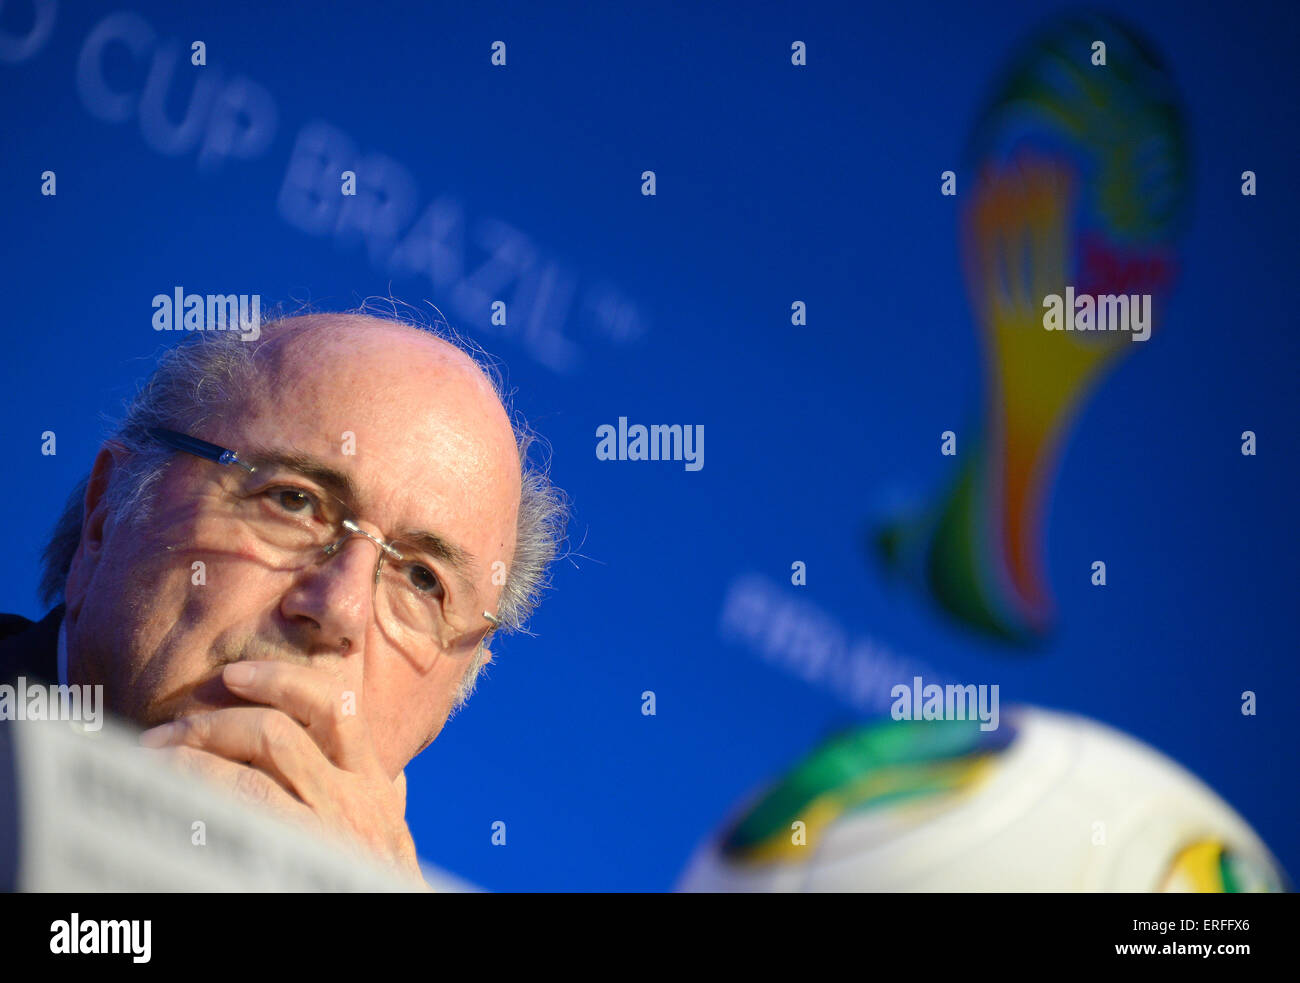 FIFA president Joseph Blatter attends a press conference after the meeting of the Organising Committee for the FIFA World Cup 2014 in Costa do Sauipe, Brazil, 03 December 2013. The final draw for the preliminary round groups of the 2014 FIFA world cup Brazil will be held on 06 December 2013. Photo: Marcus Brandt/dpa Stock Photo